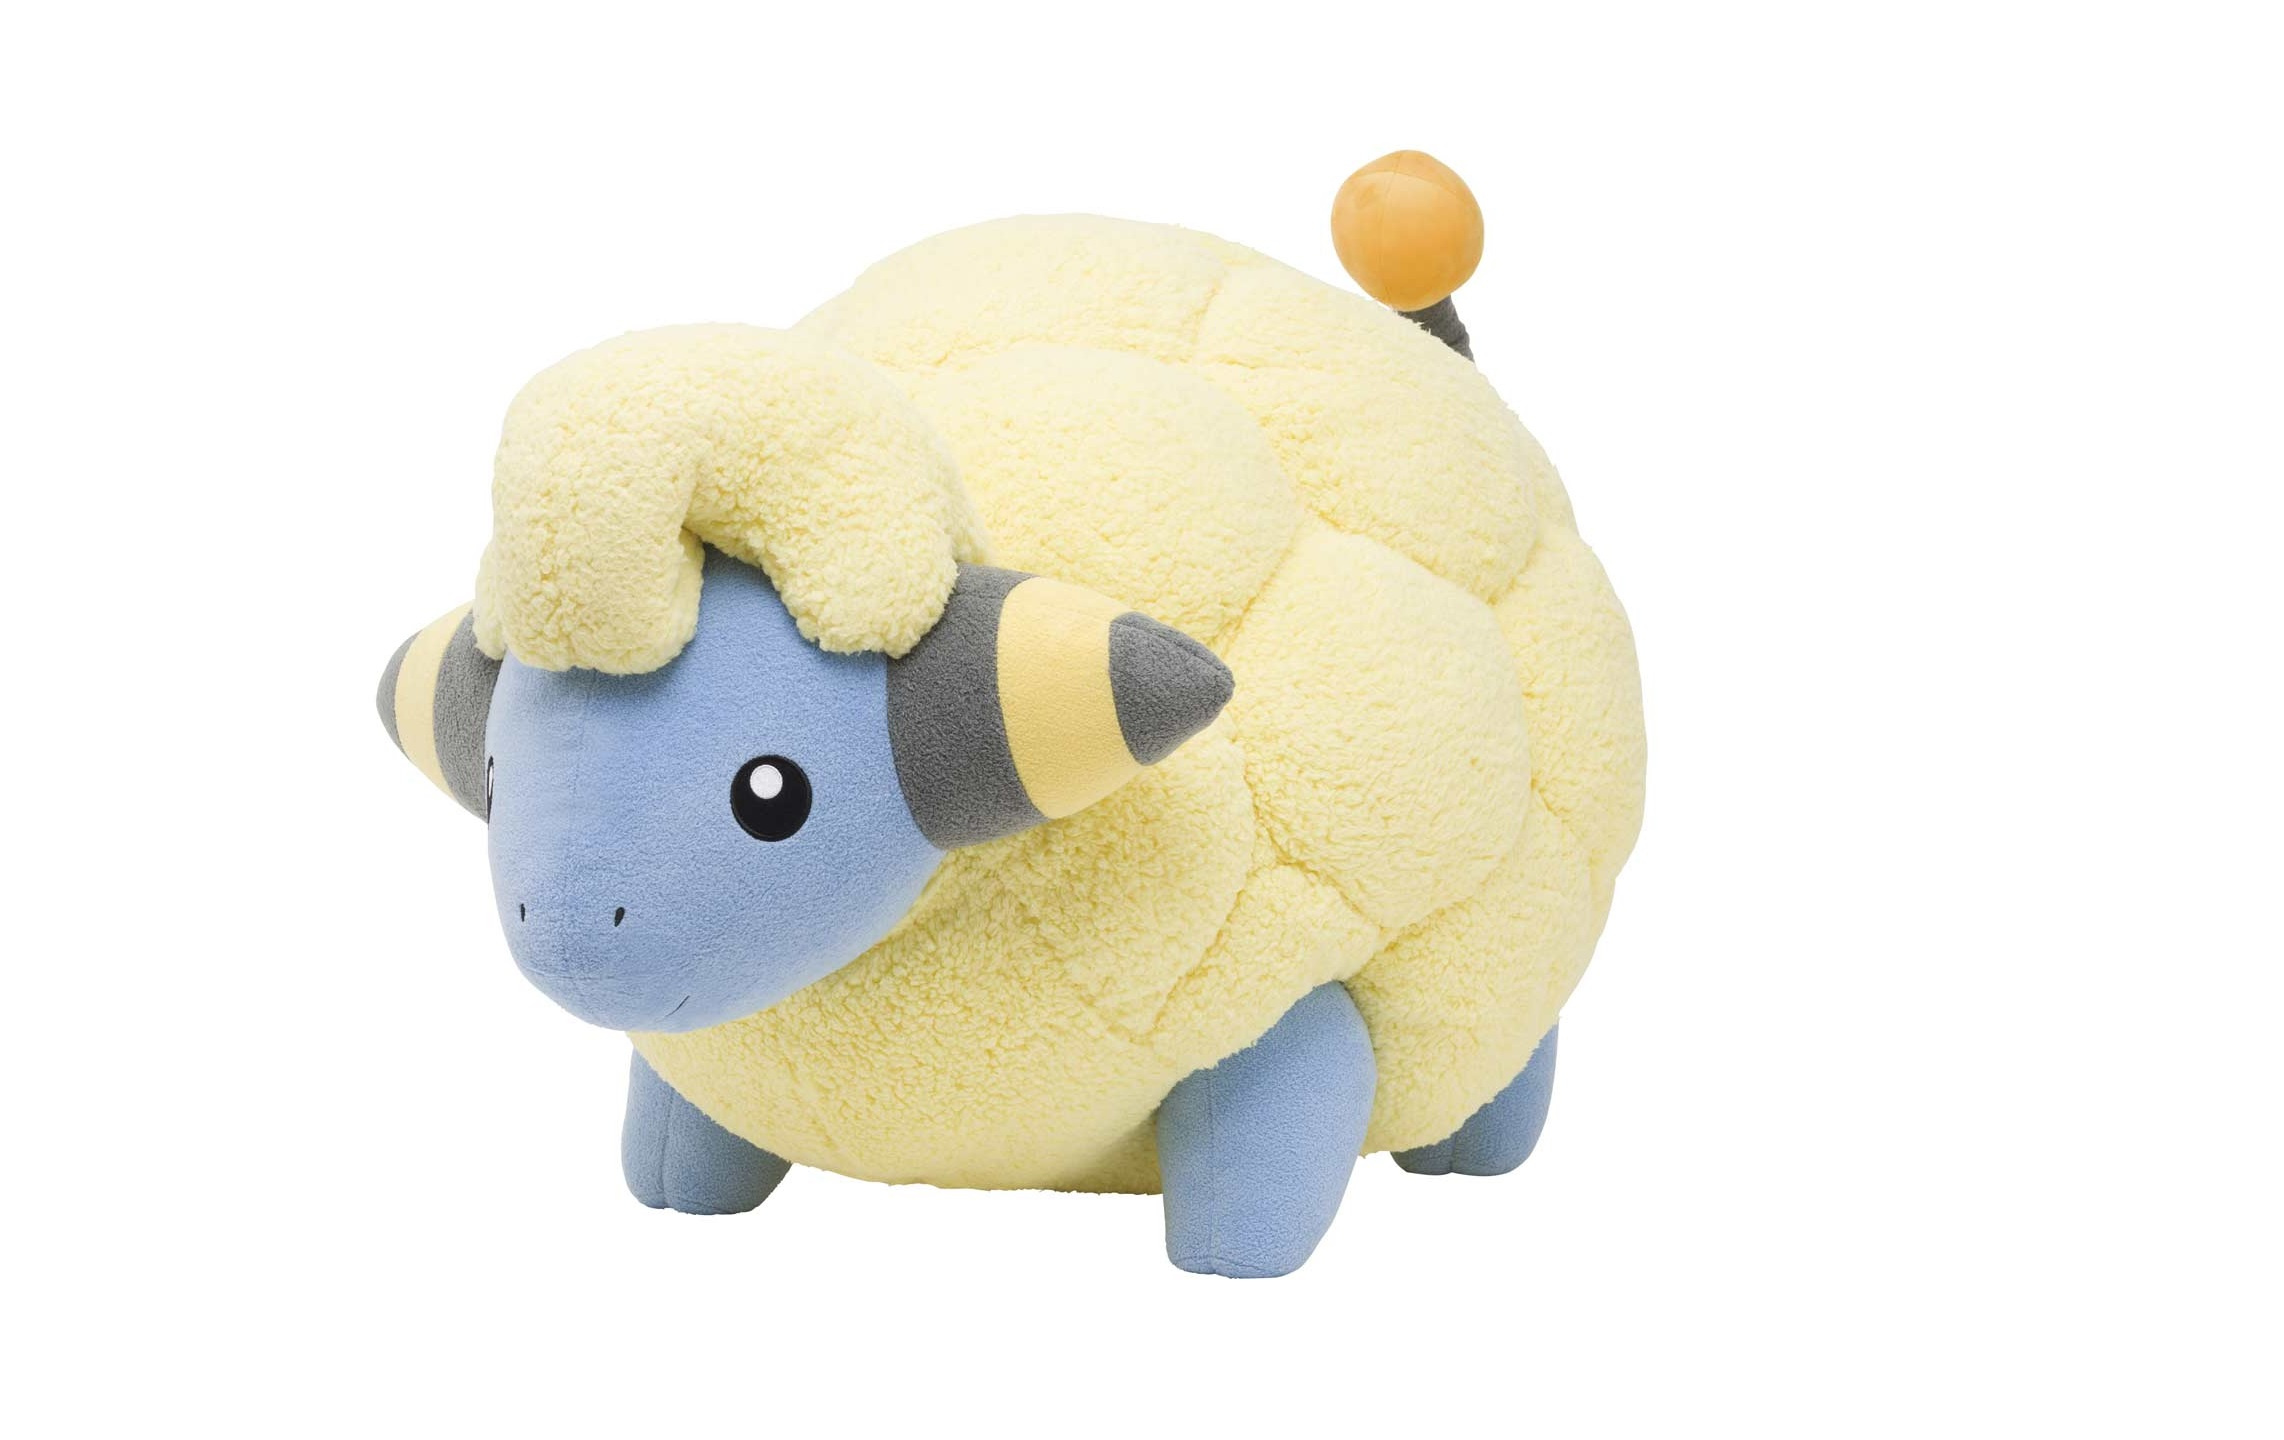 Pre Order This Jumbo Size Mareep Poke Plush For A Small Fortune